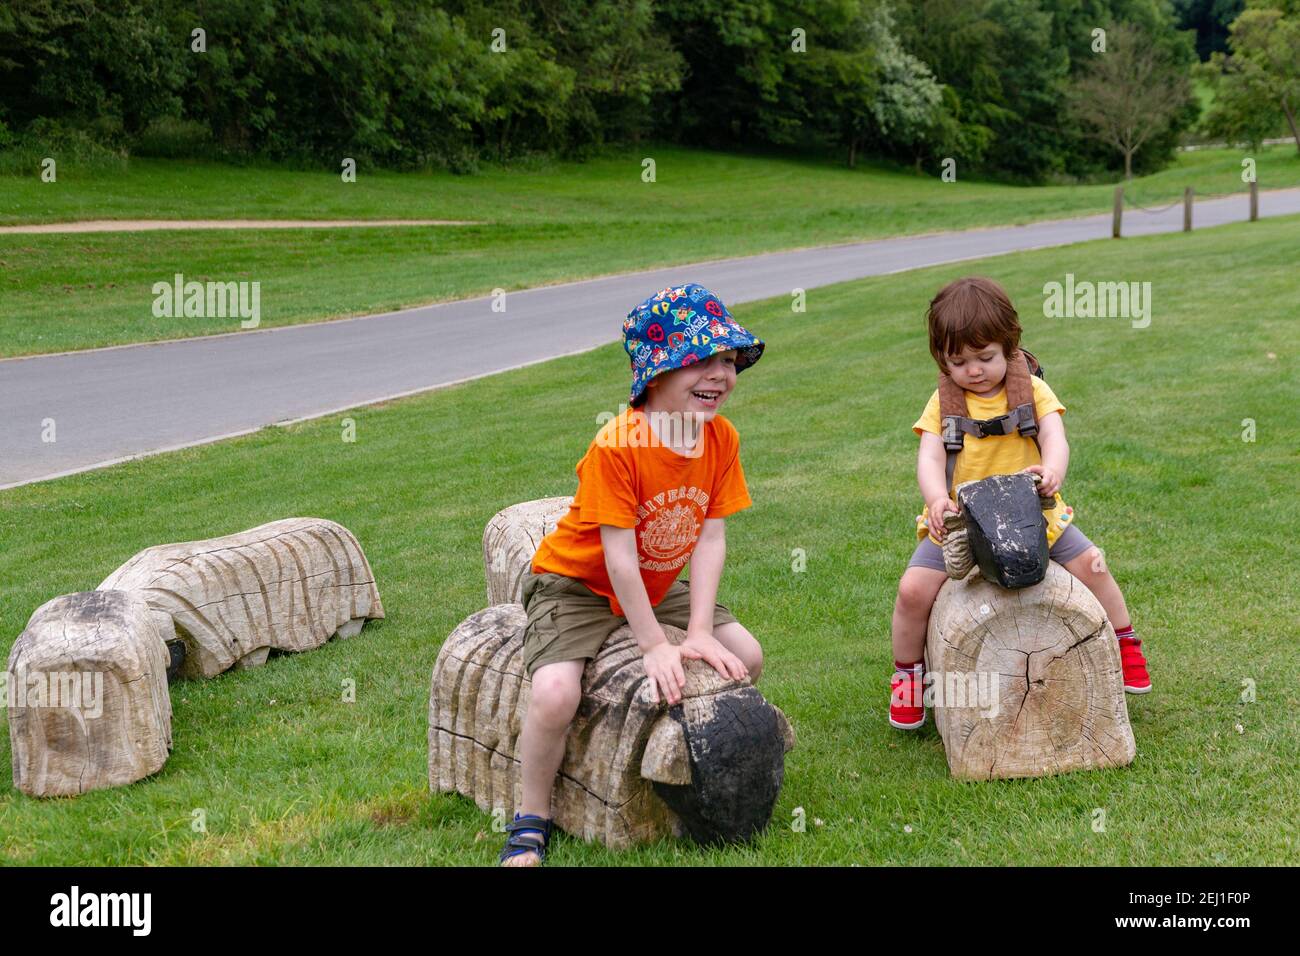 Children playing in a field with some wood animals Stock Photo